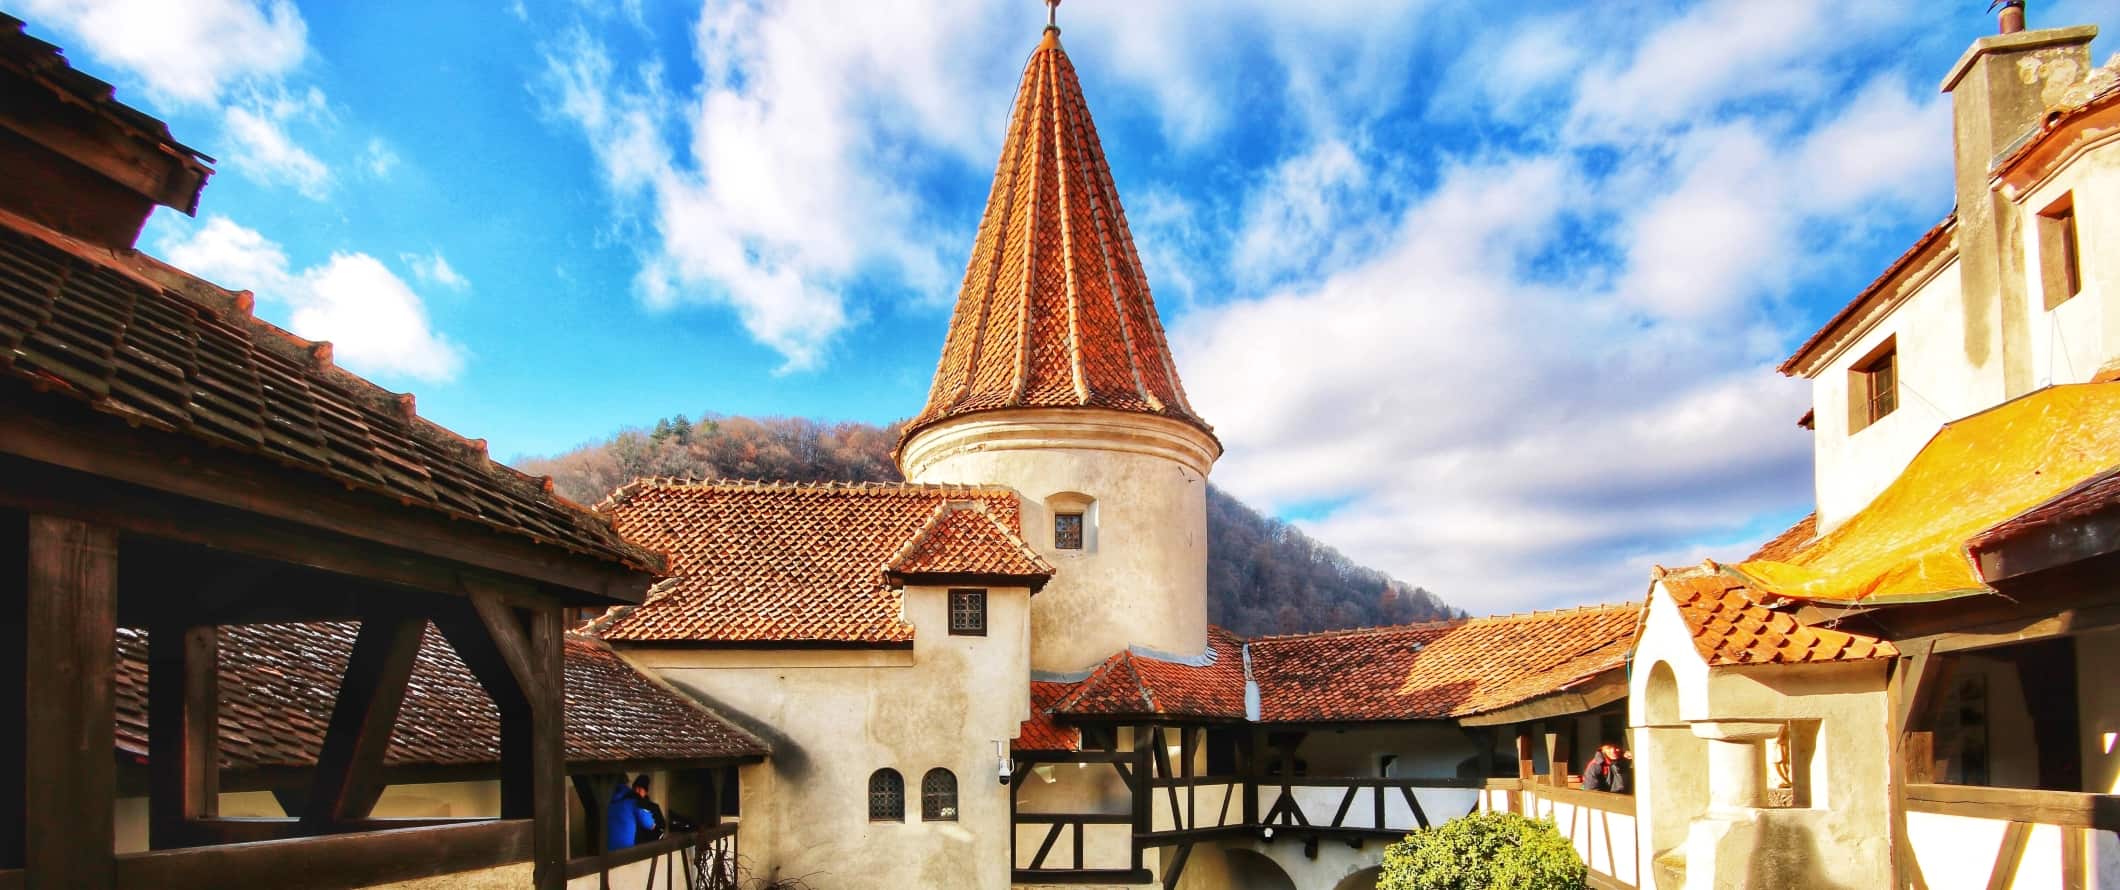 Turret and red-shingled roofs at Bran Castle in Brasov, Romania.